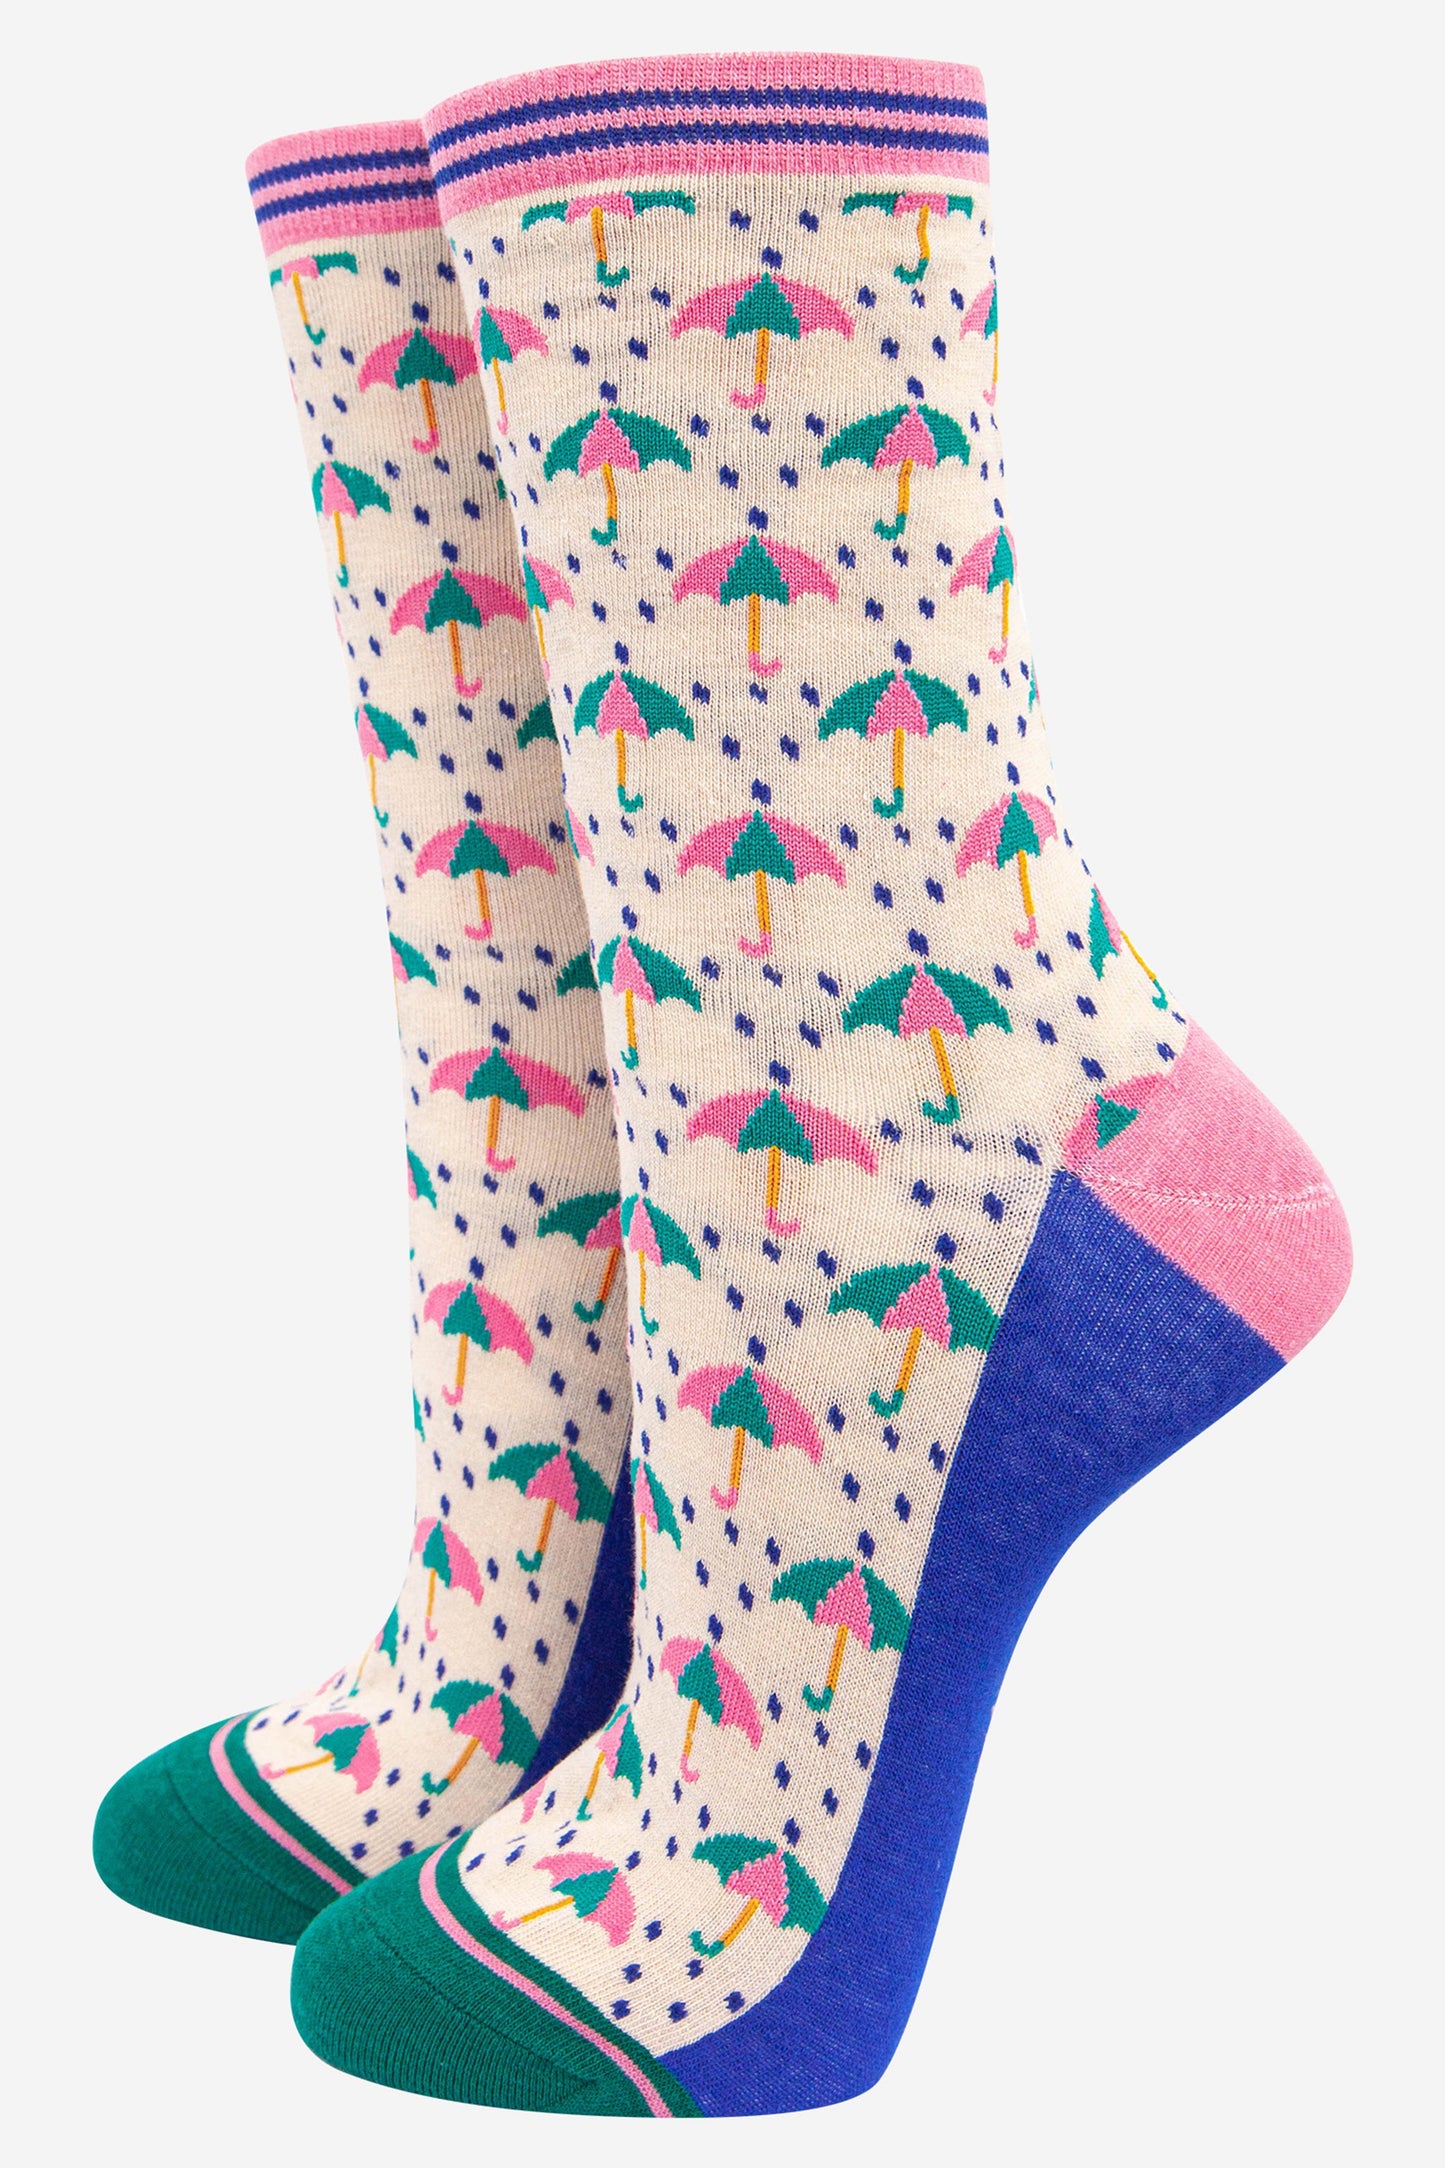 womens bamboo ankle socks with an all over pink and green umbrella and rain print pattern